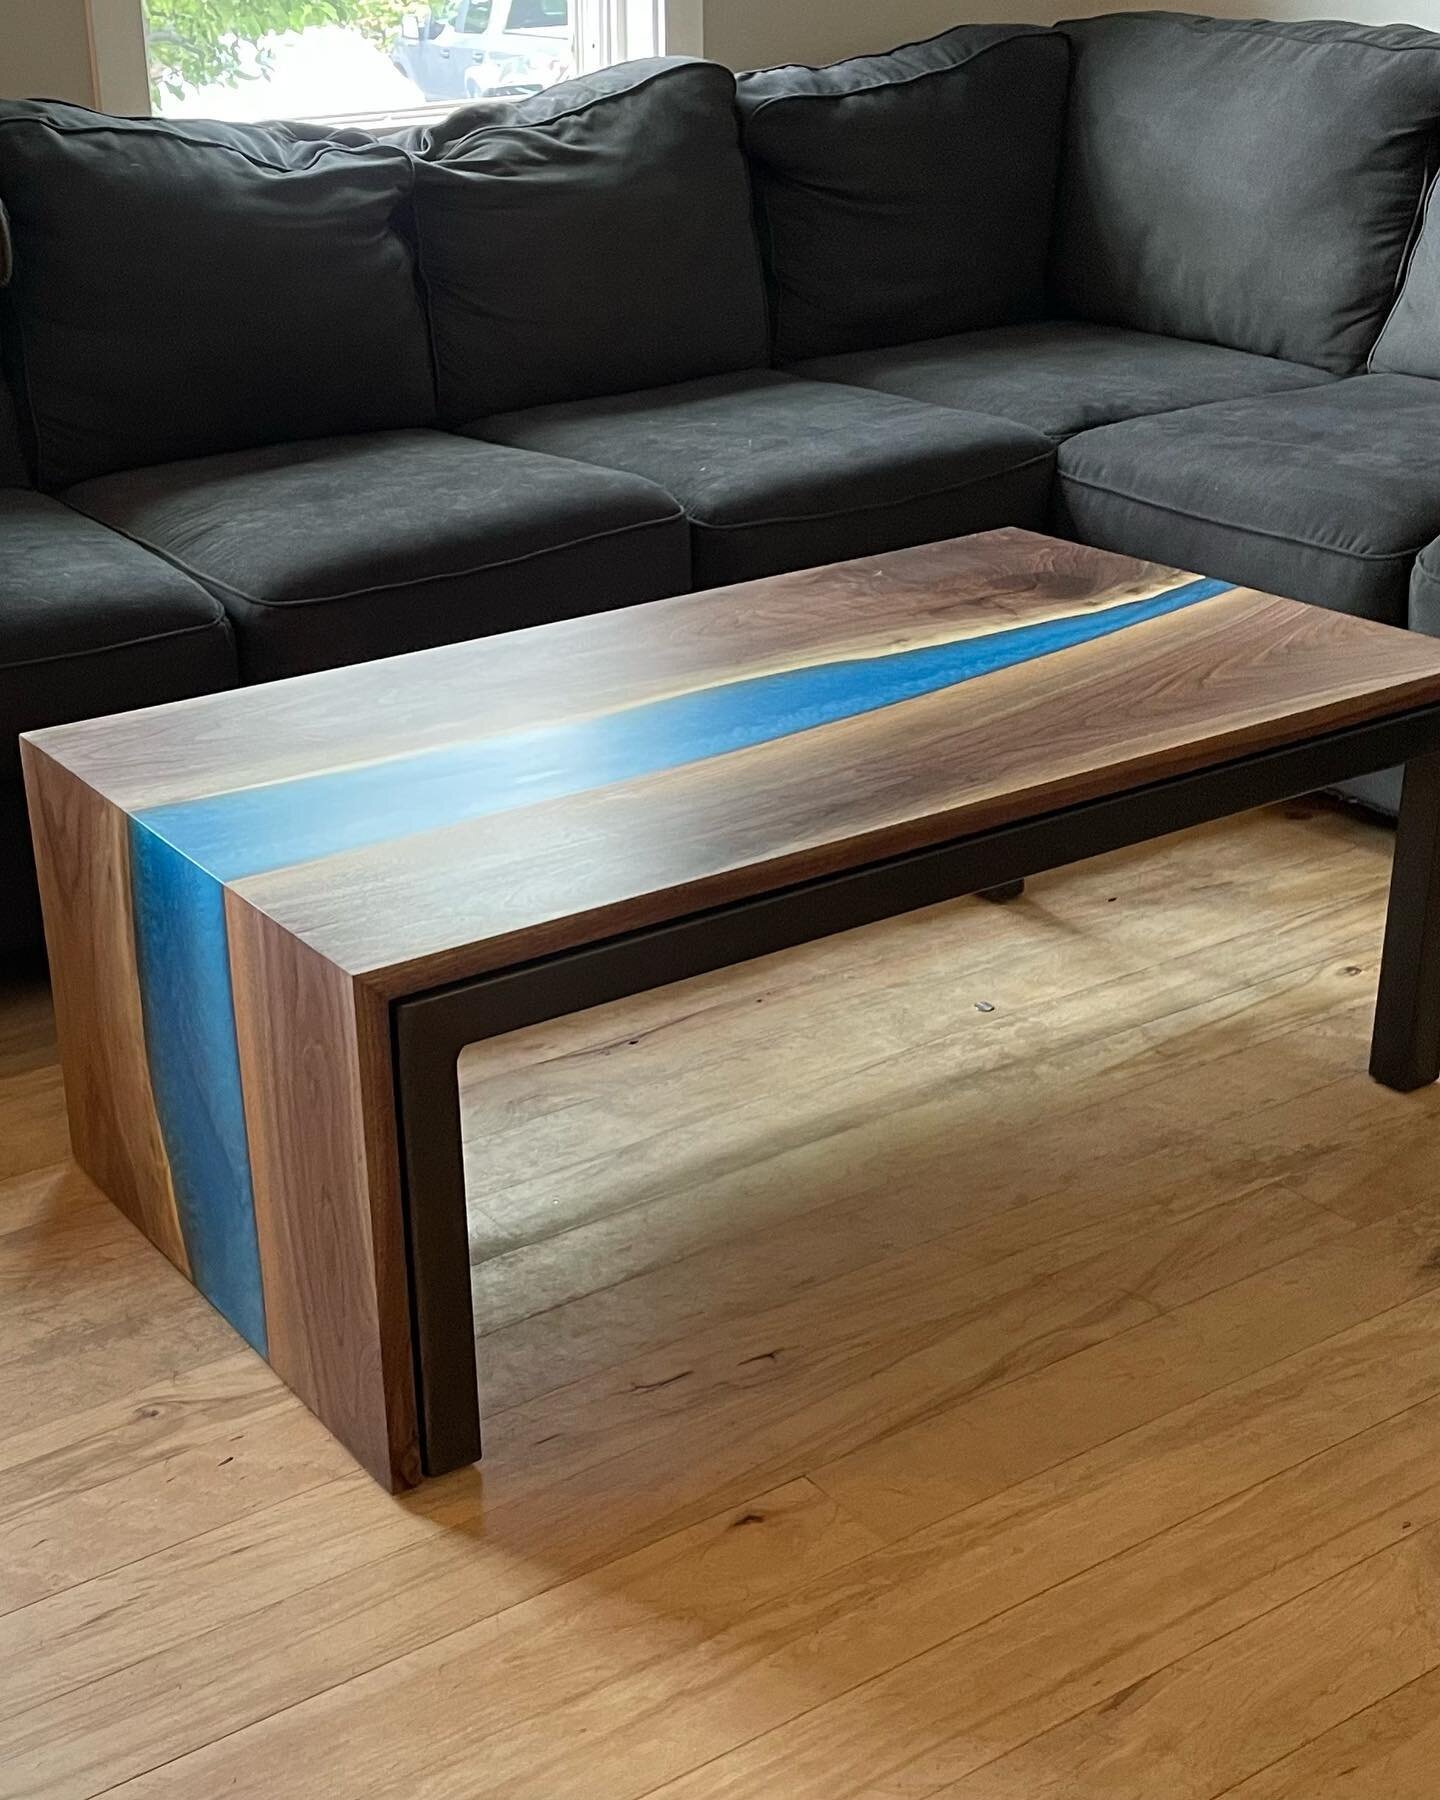 Epoxy walnut coffee table is up for grabs. It measures 18&rdquo;H x 26&rdquo;W x 48&rdquo;L. Message me if you are interested